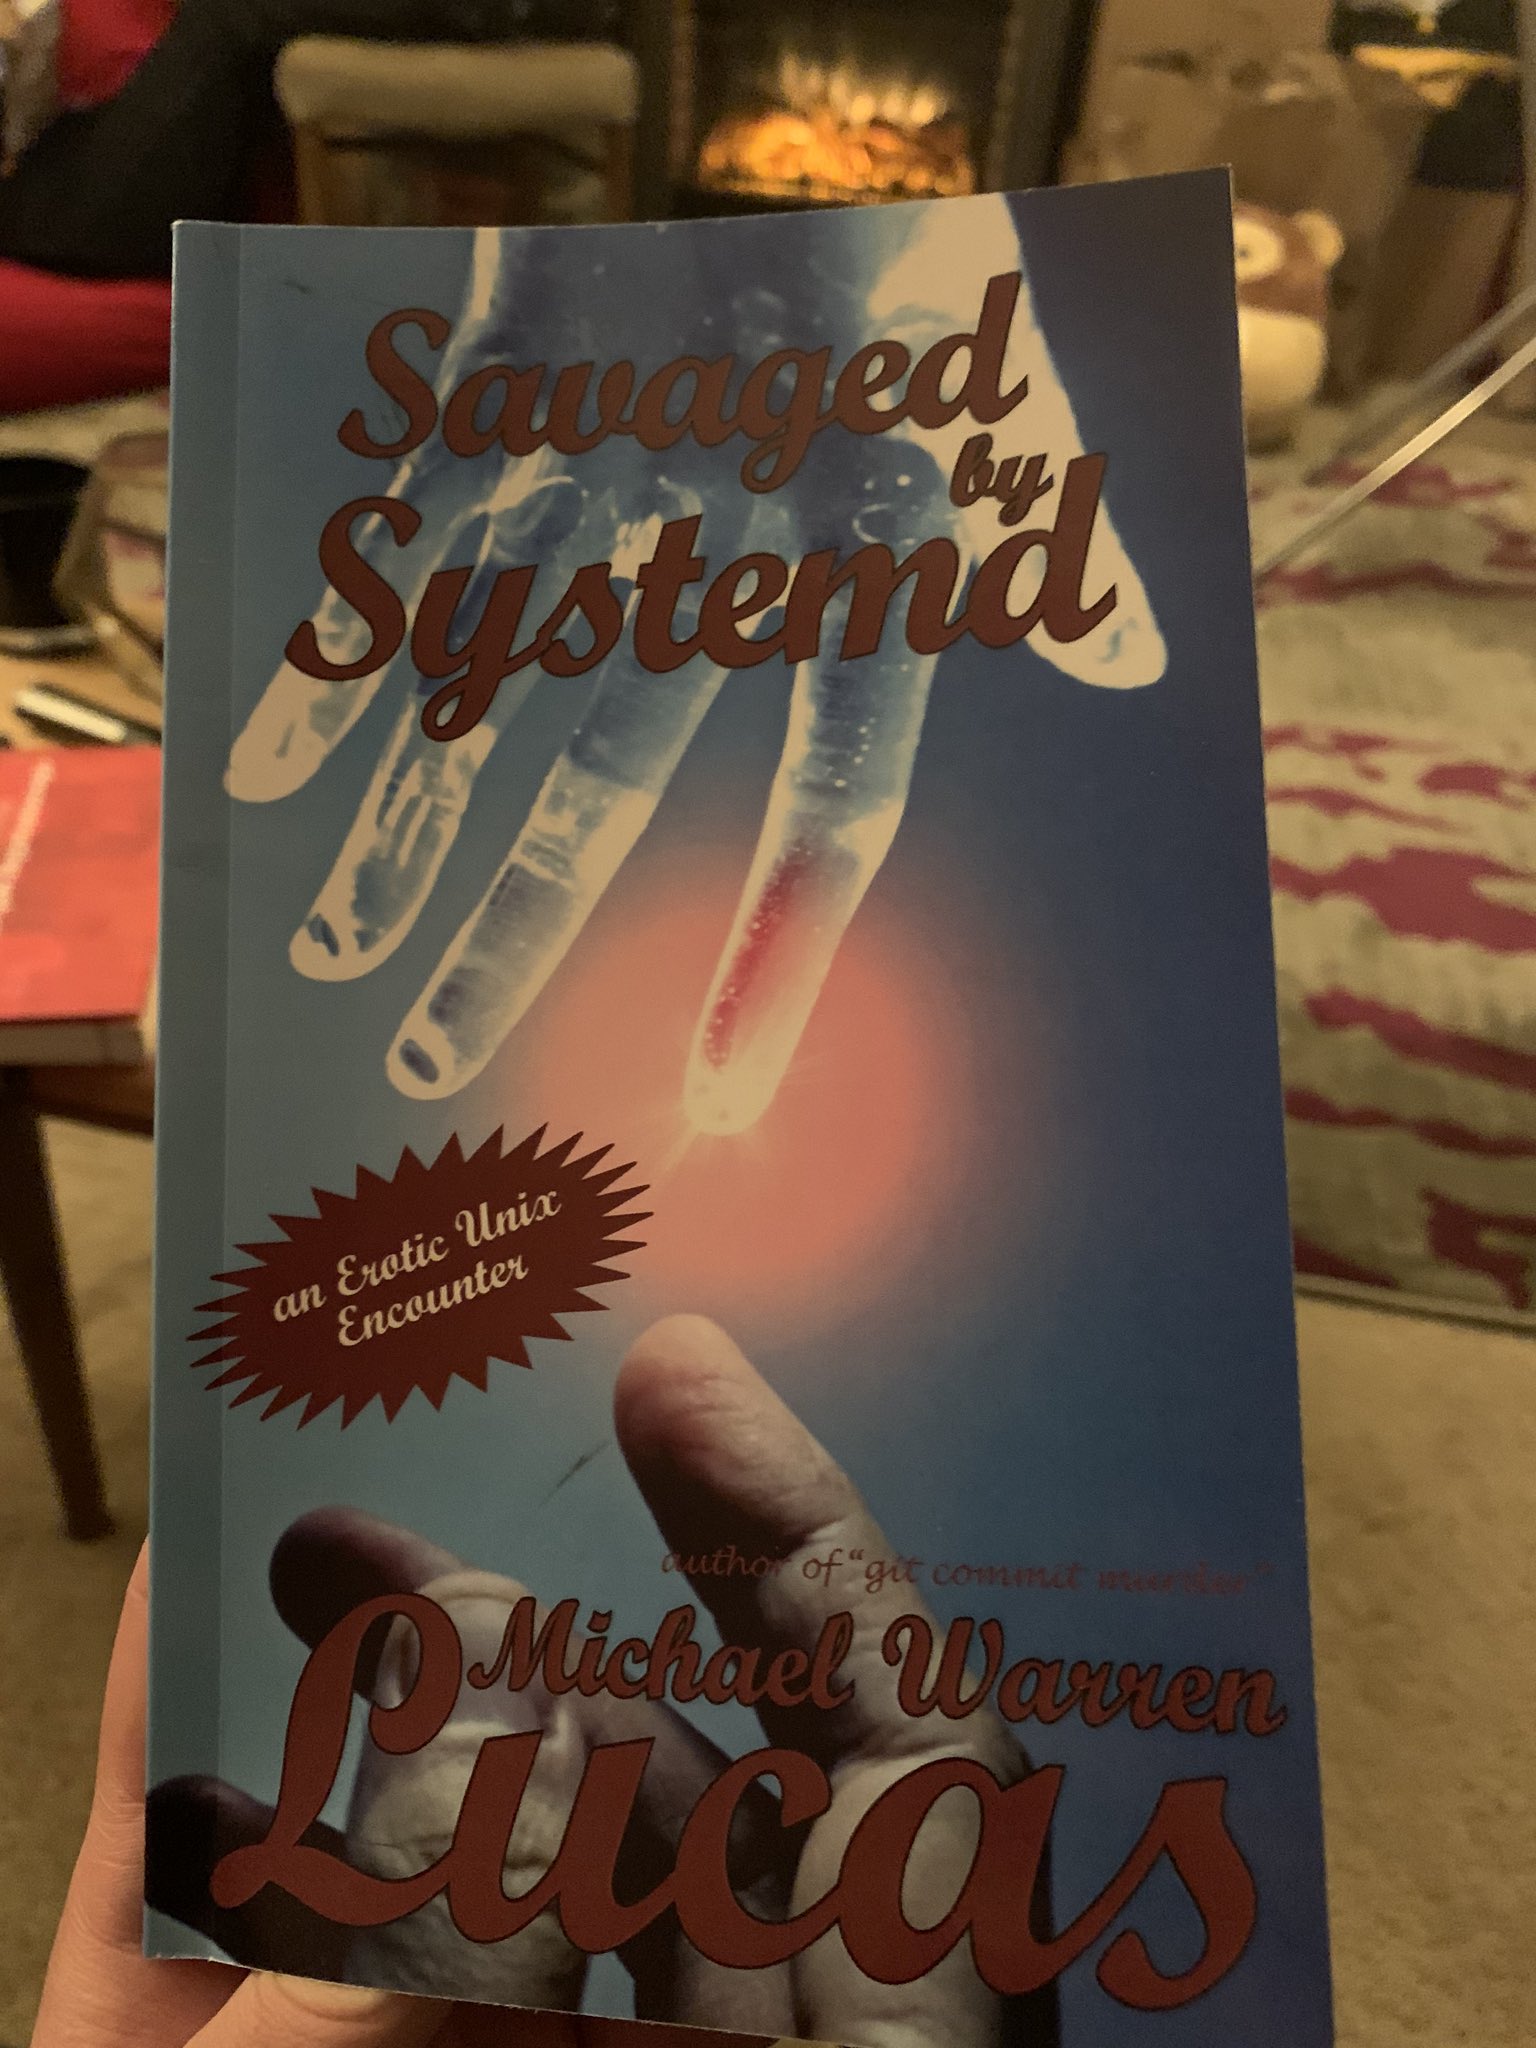 Systemd an encounter unix savaged erotic by Savaged by